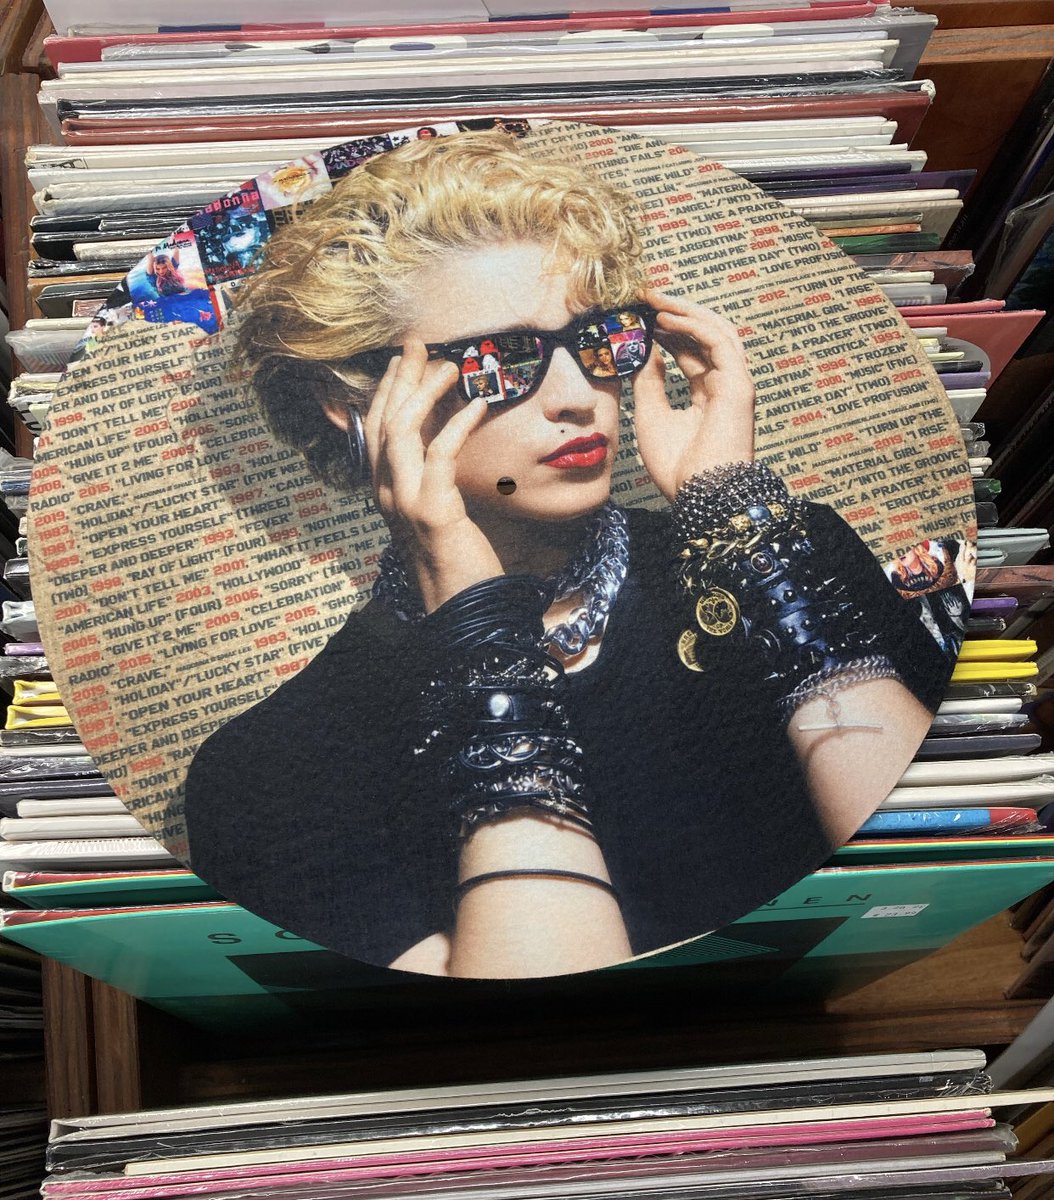 Pick up the new MADONNA collection 'FINALLY ENOUGH LOVE: 50 NUMBER ONES' on vinyl or CD and get one of these MADONNA slip mats while supply lasts!